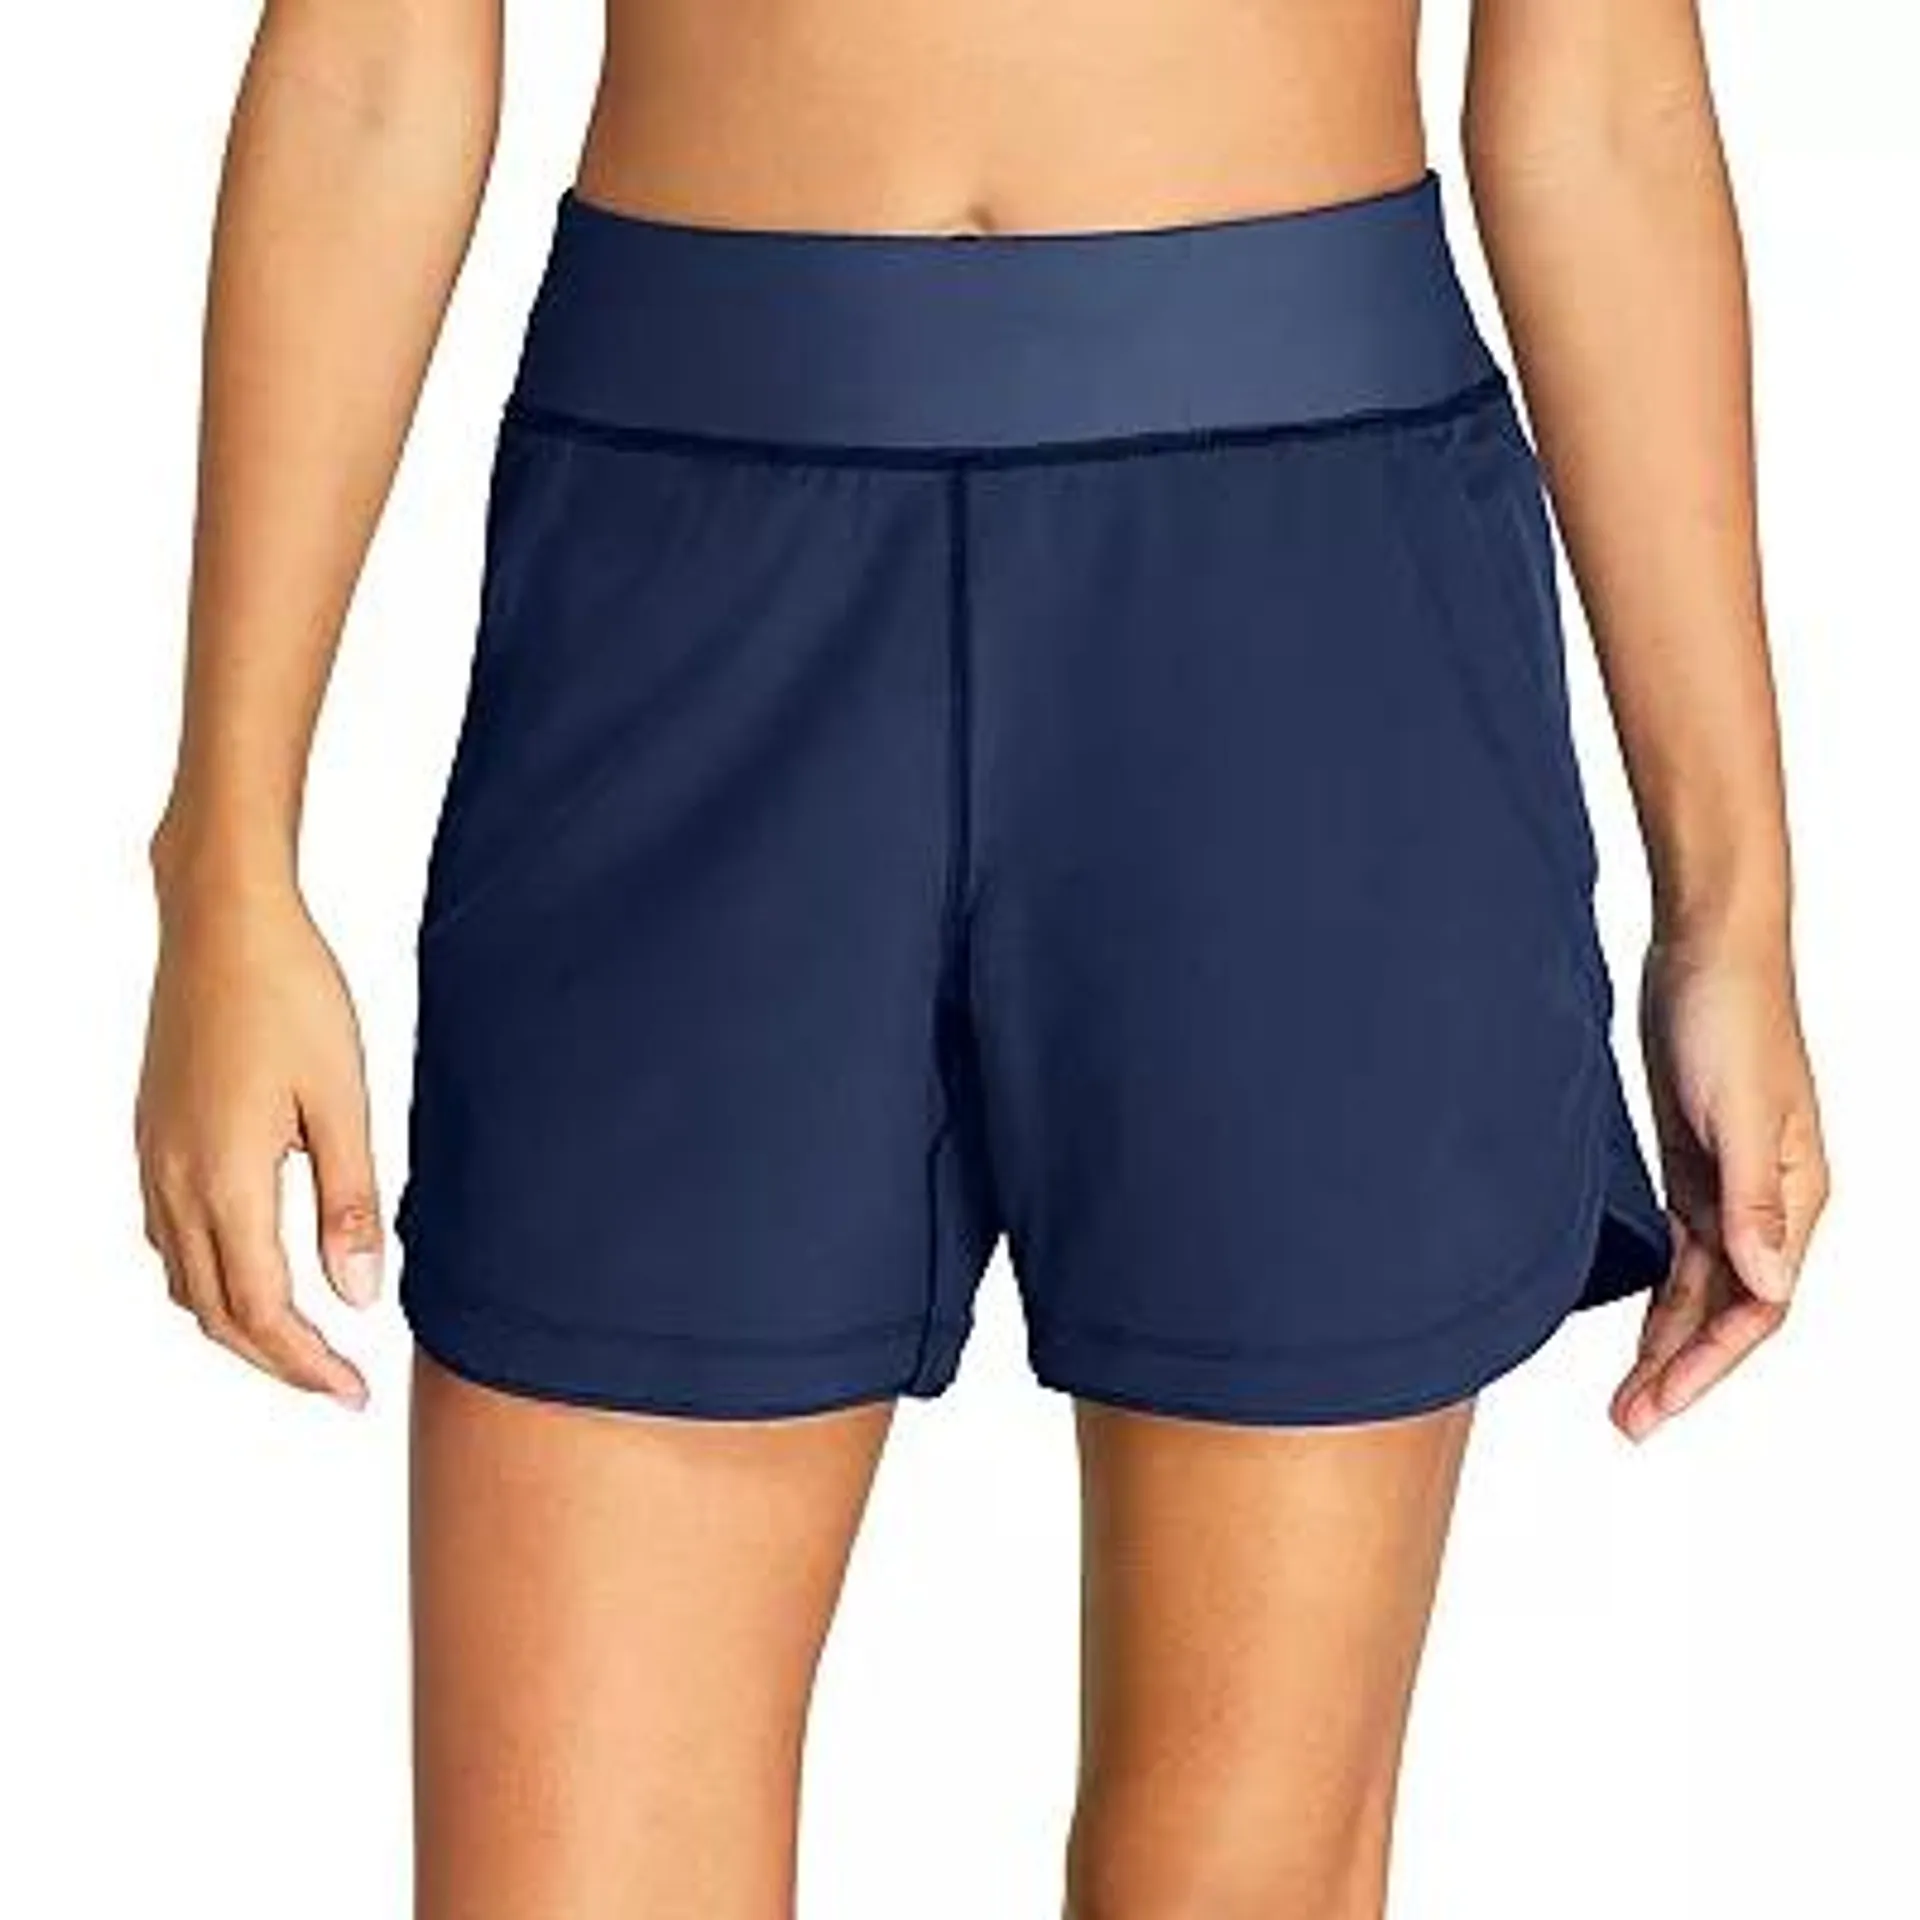 Women's Lands' End 5" Quick Dry Elastic Waist Board Shorts Swim Shorts With Panty